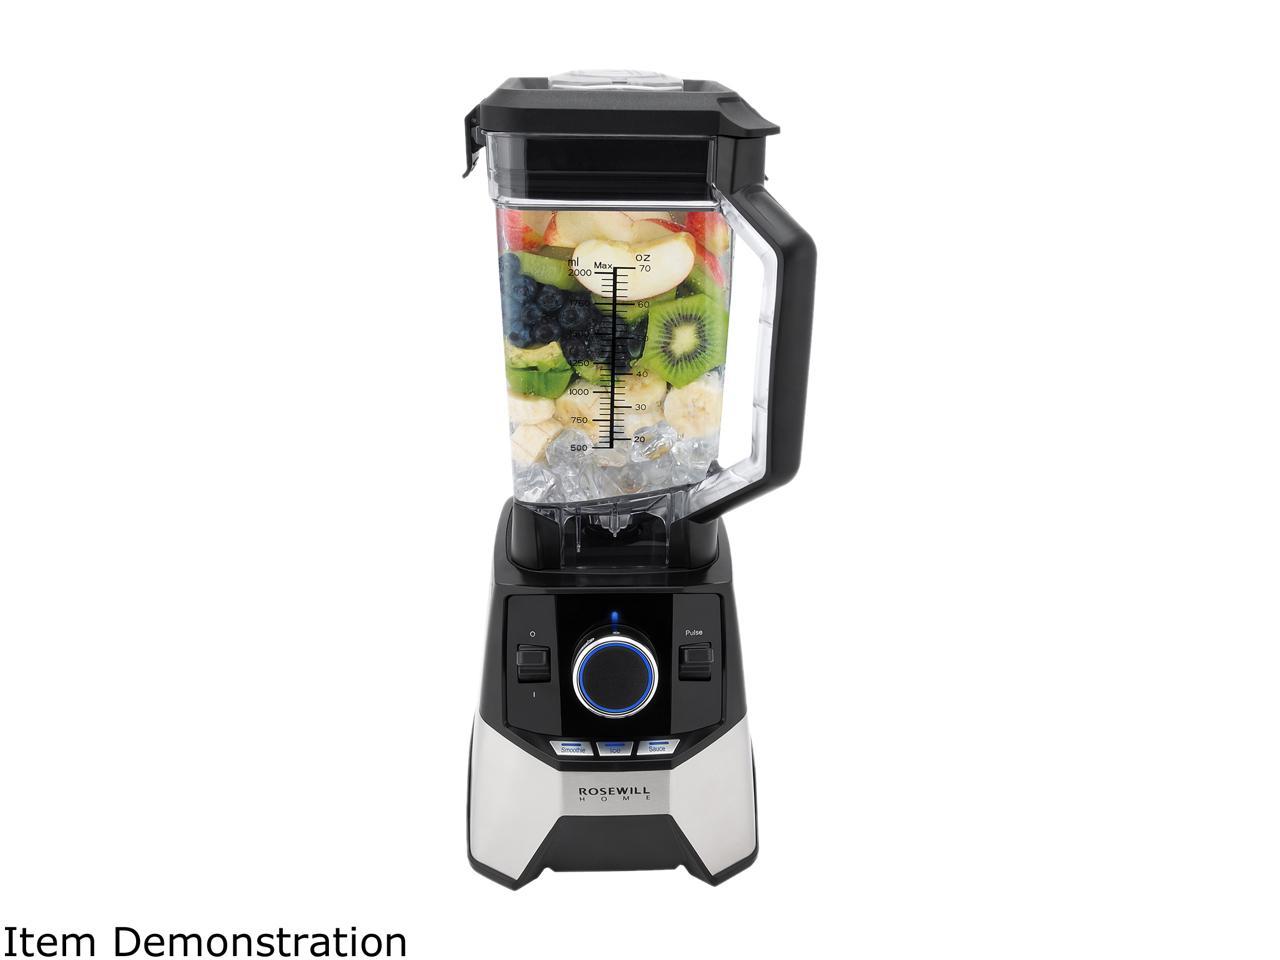 Rosewill Professional Blender, Industrial Commercial High Power Speed RHPB-18001 - image 1 of 8